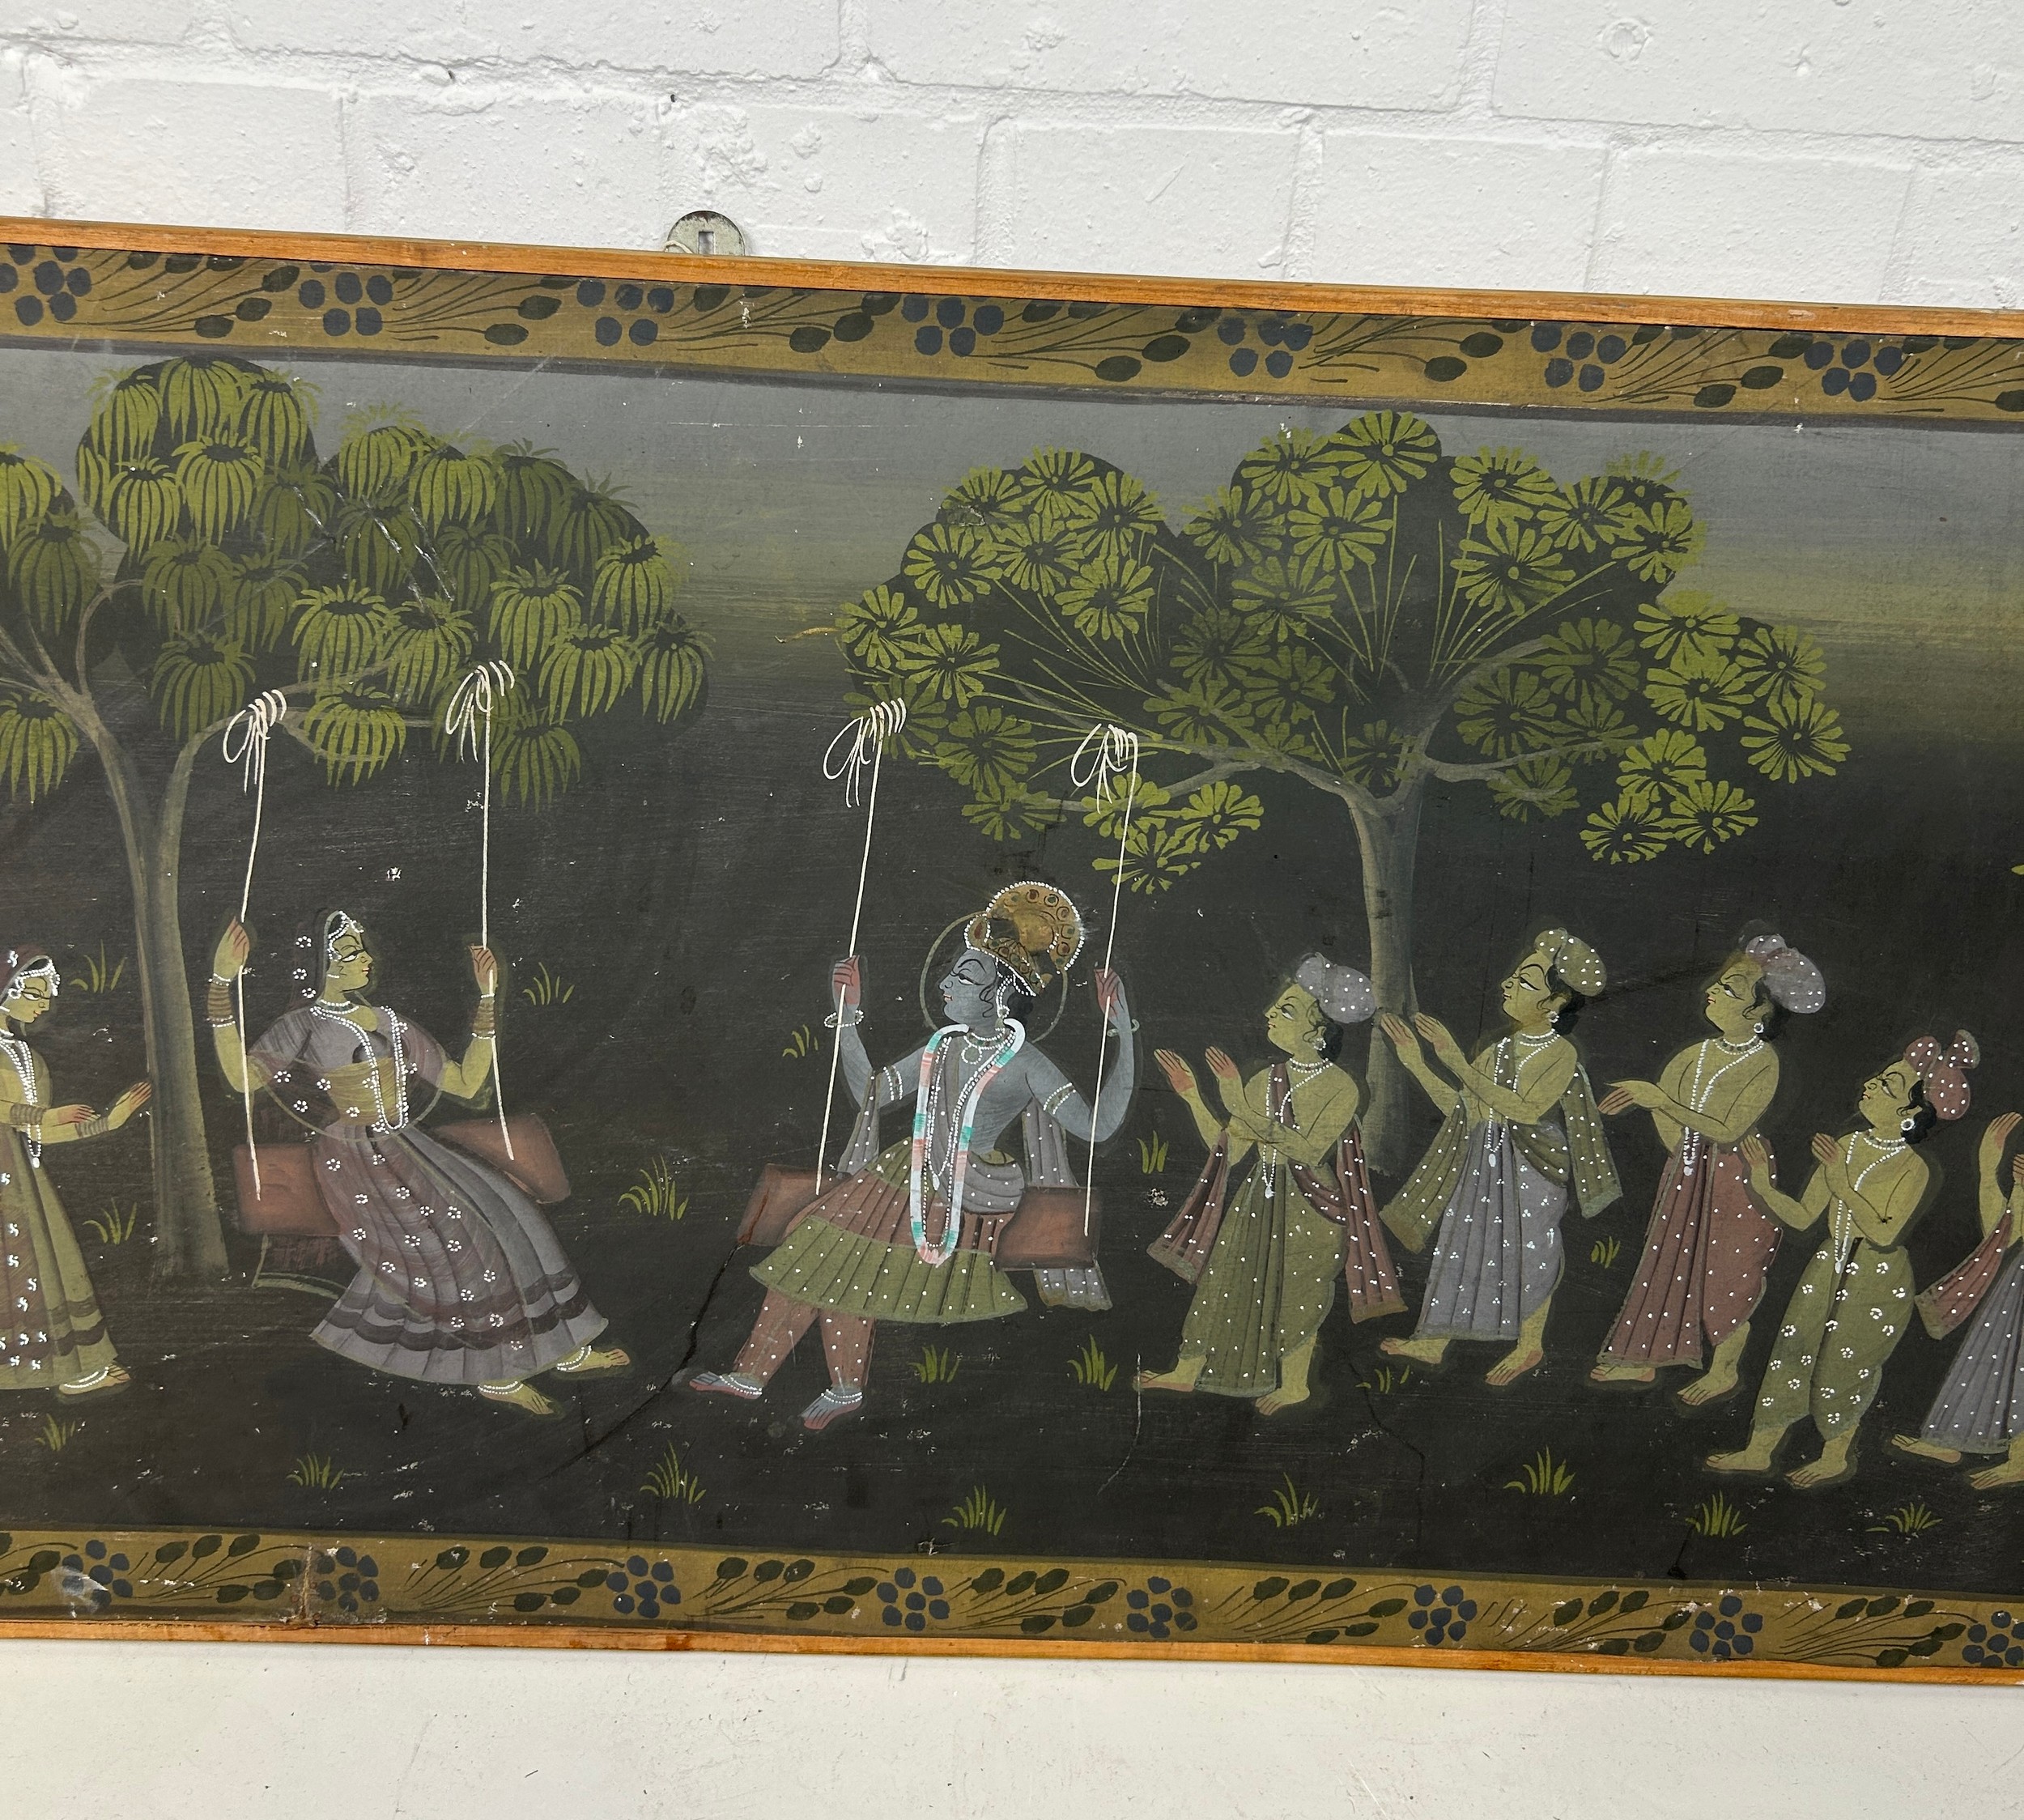 A LARGE INDIAN PAINTING ON LINEN 182cm x 59cm - Image 3 of 4